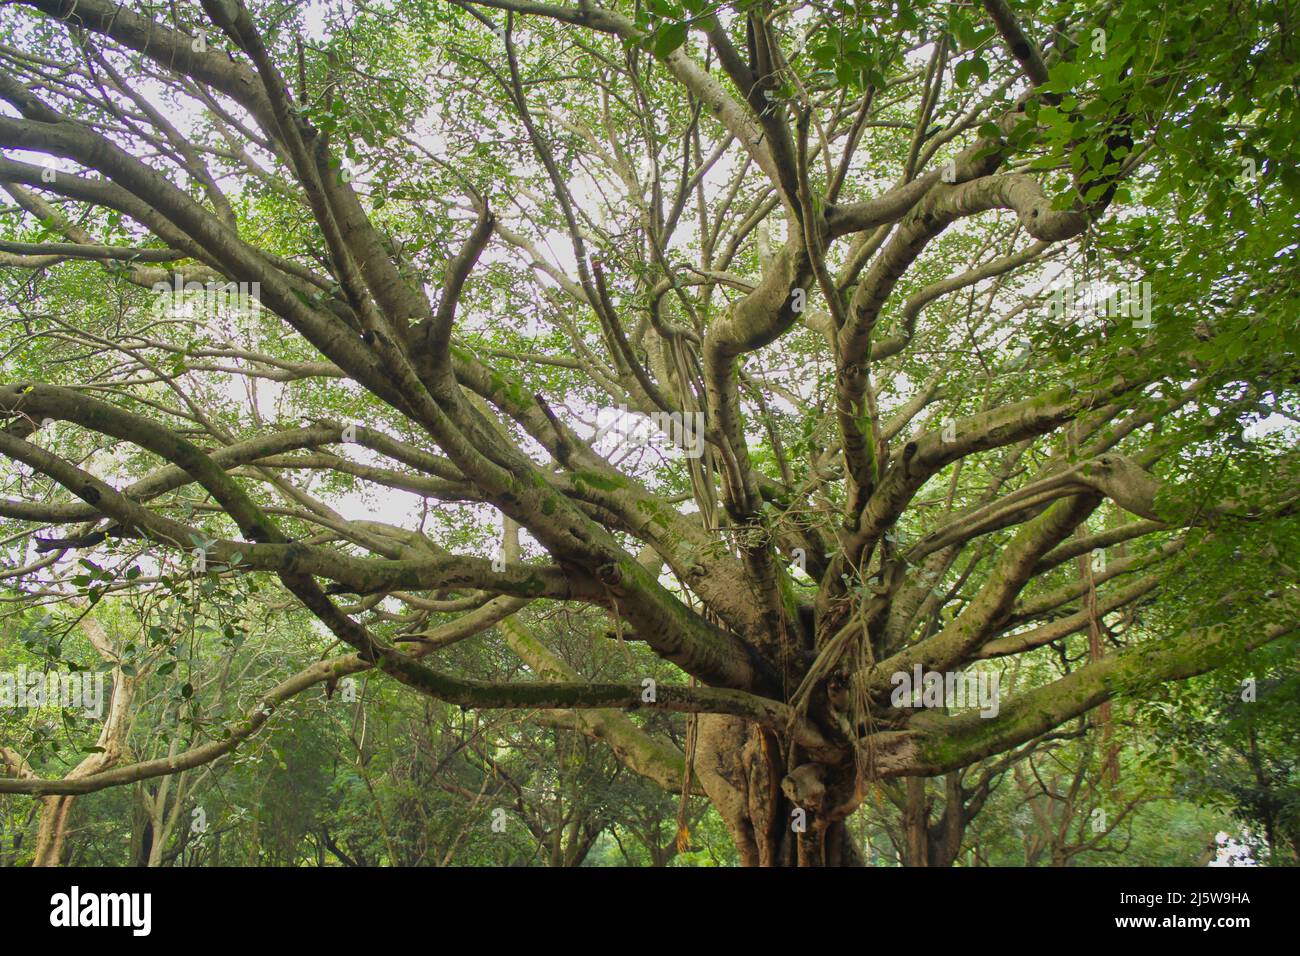 The tree in a park in Bangalore with fascinating branch formation Stock Photo